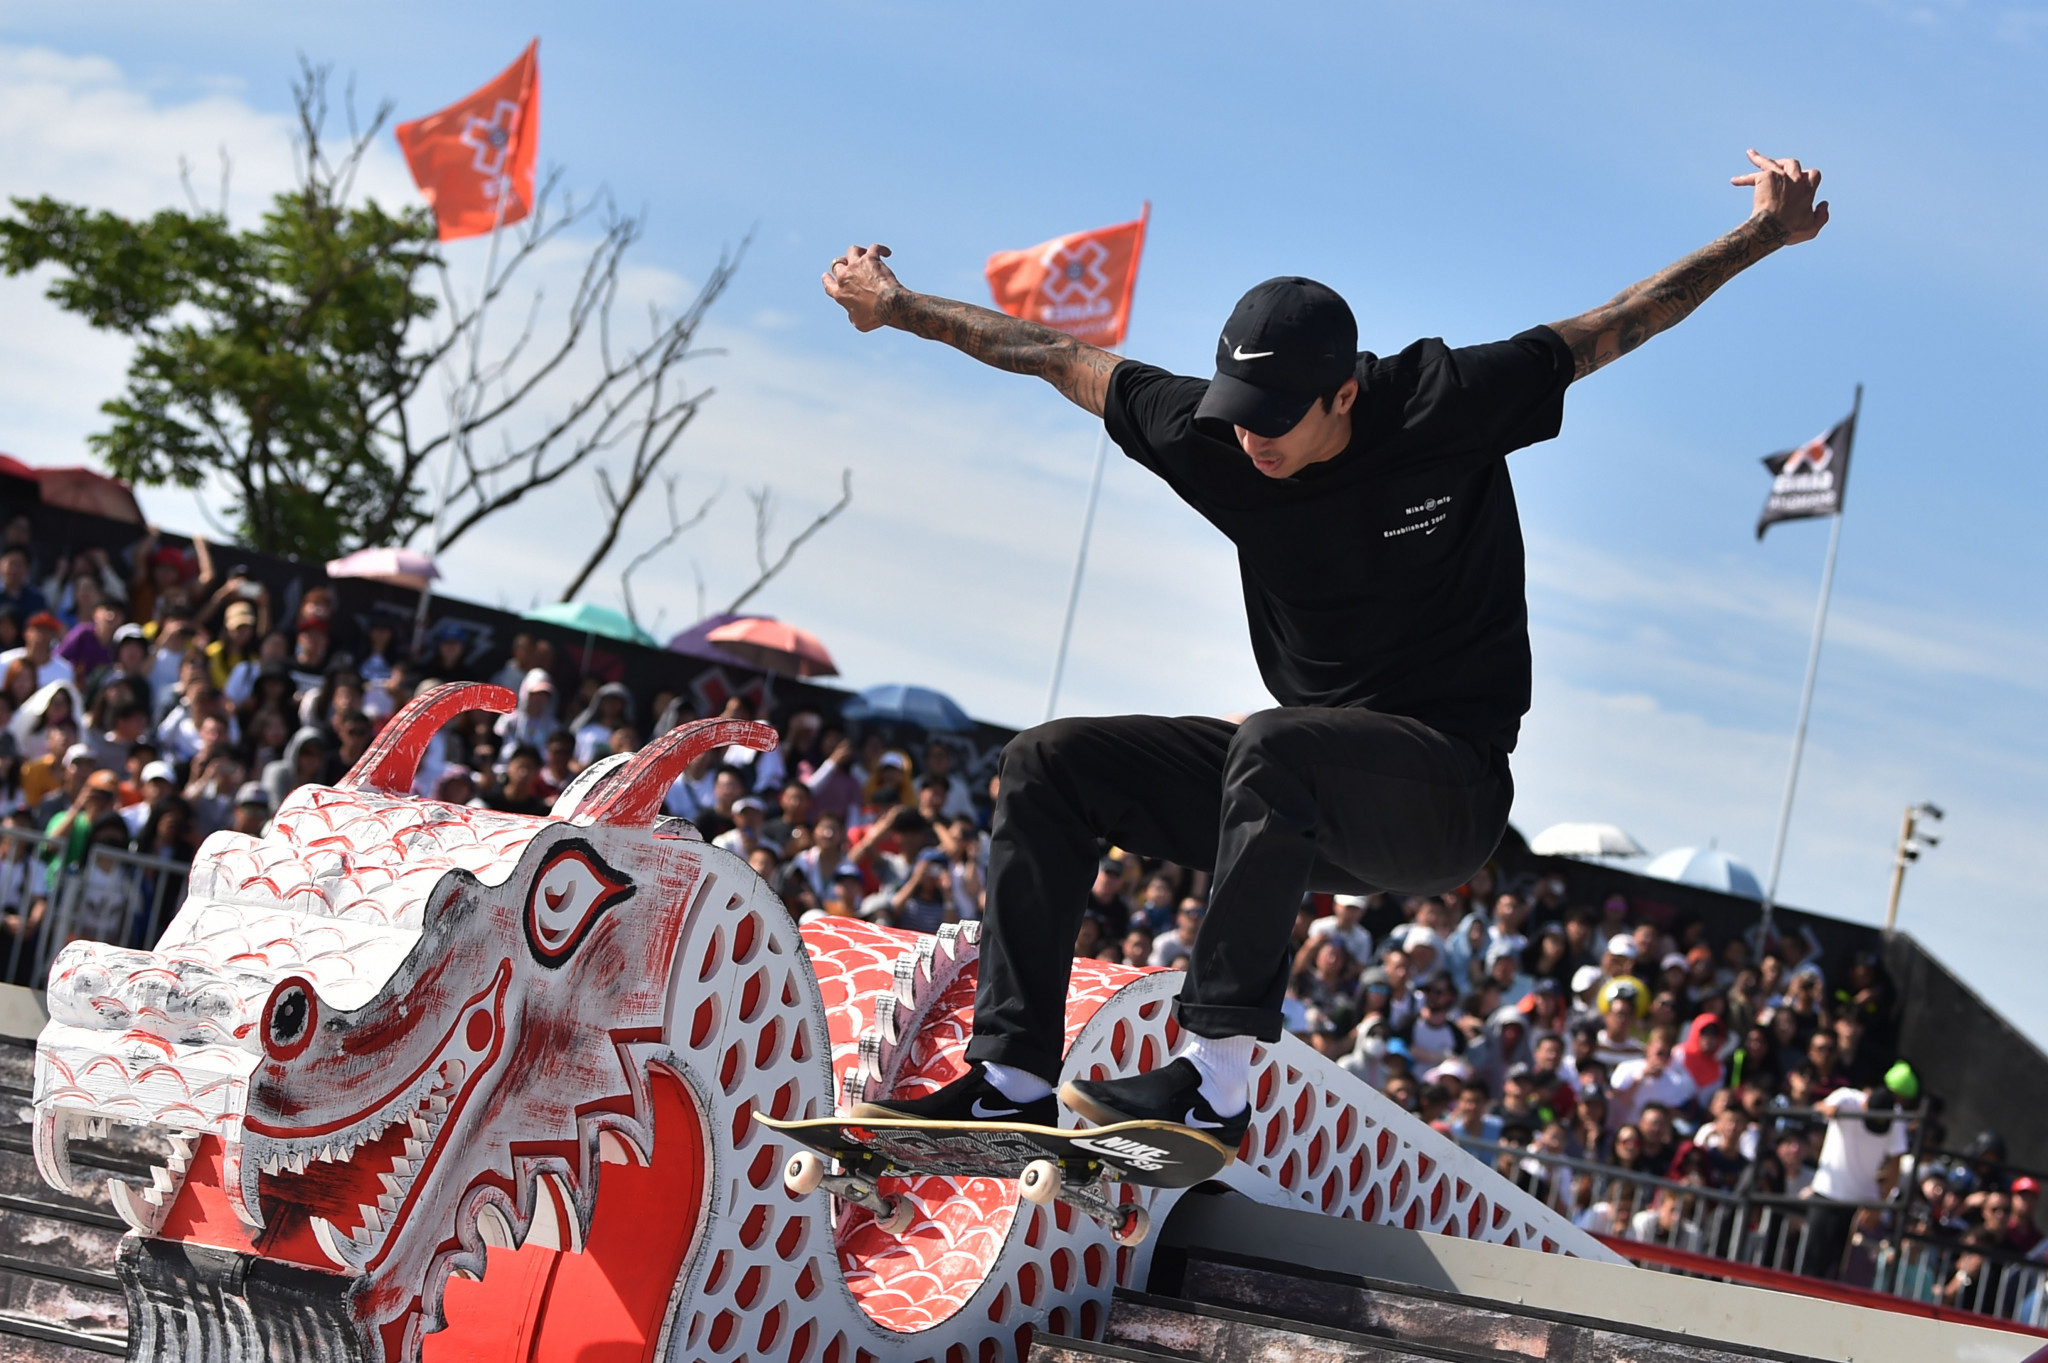 Skateboarding was axed from the Lima 2019 Pan American Games programme last month ©Getty Images